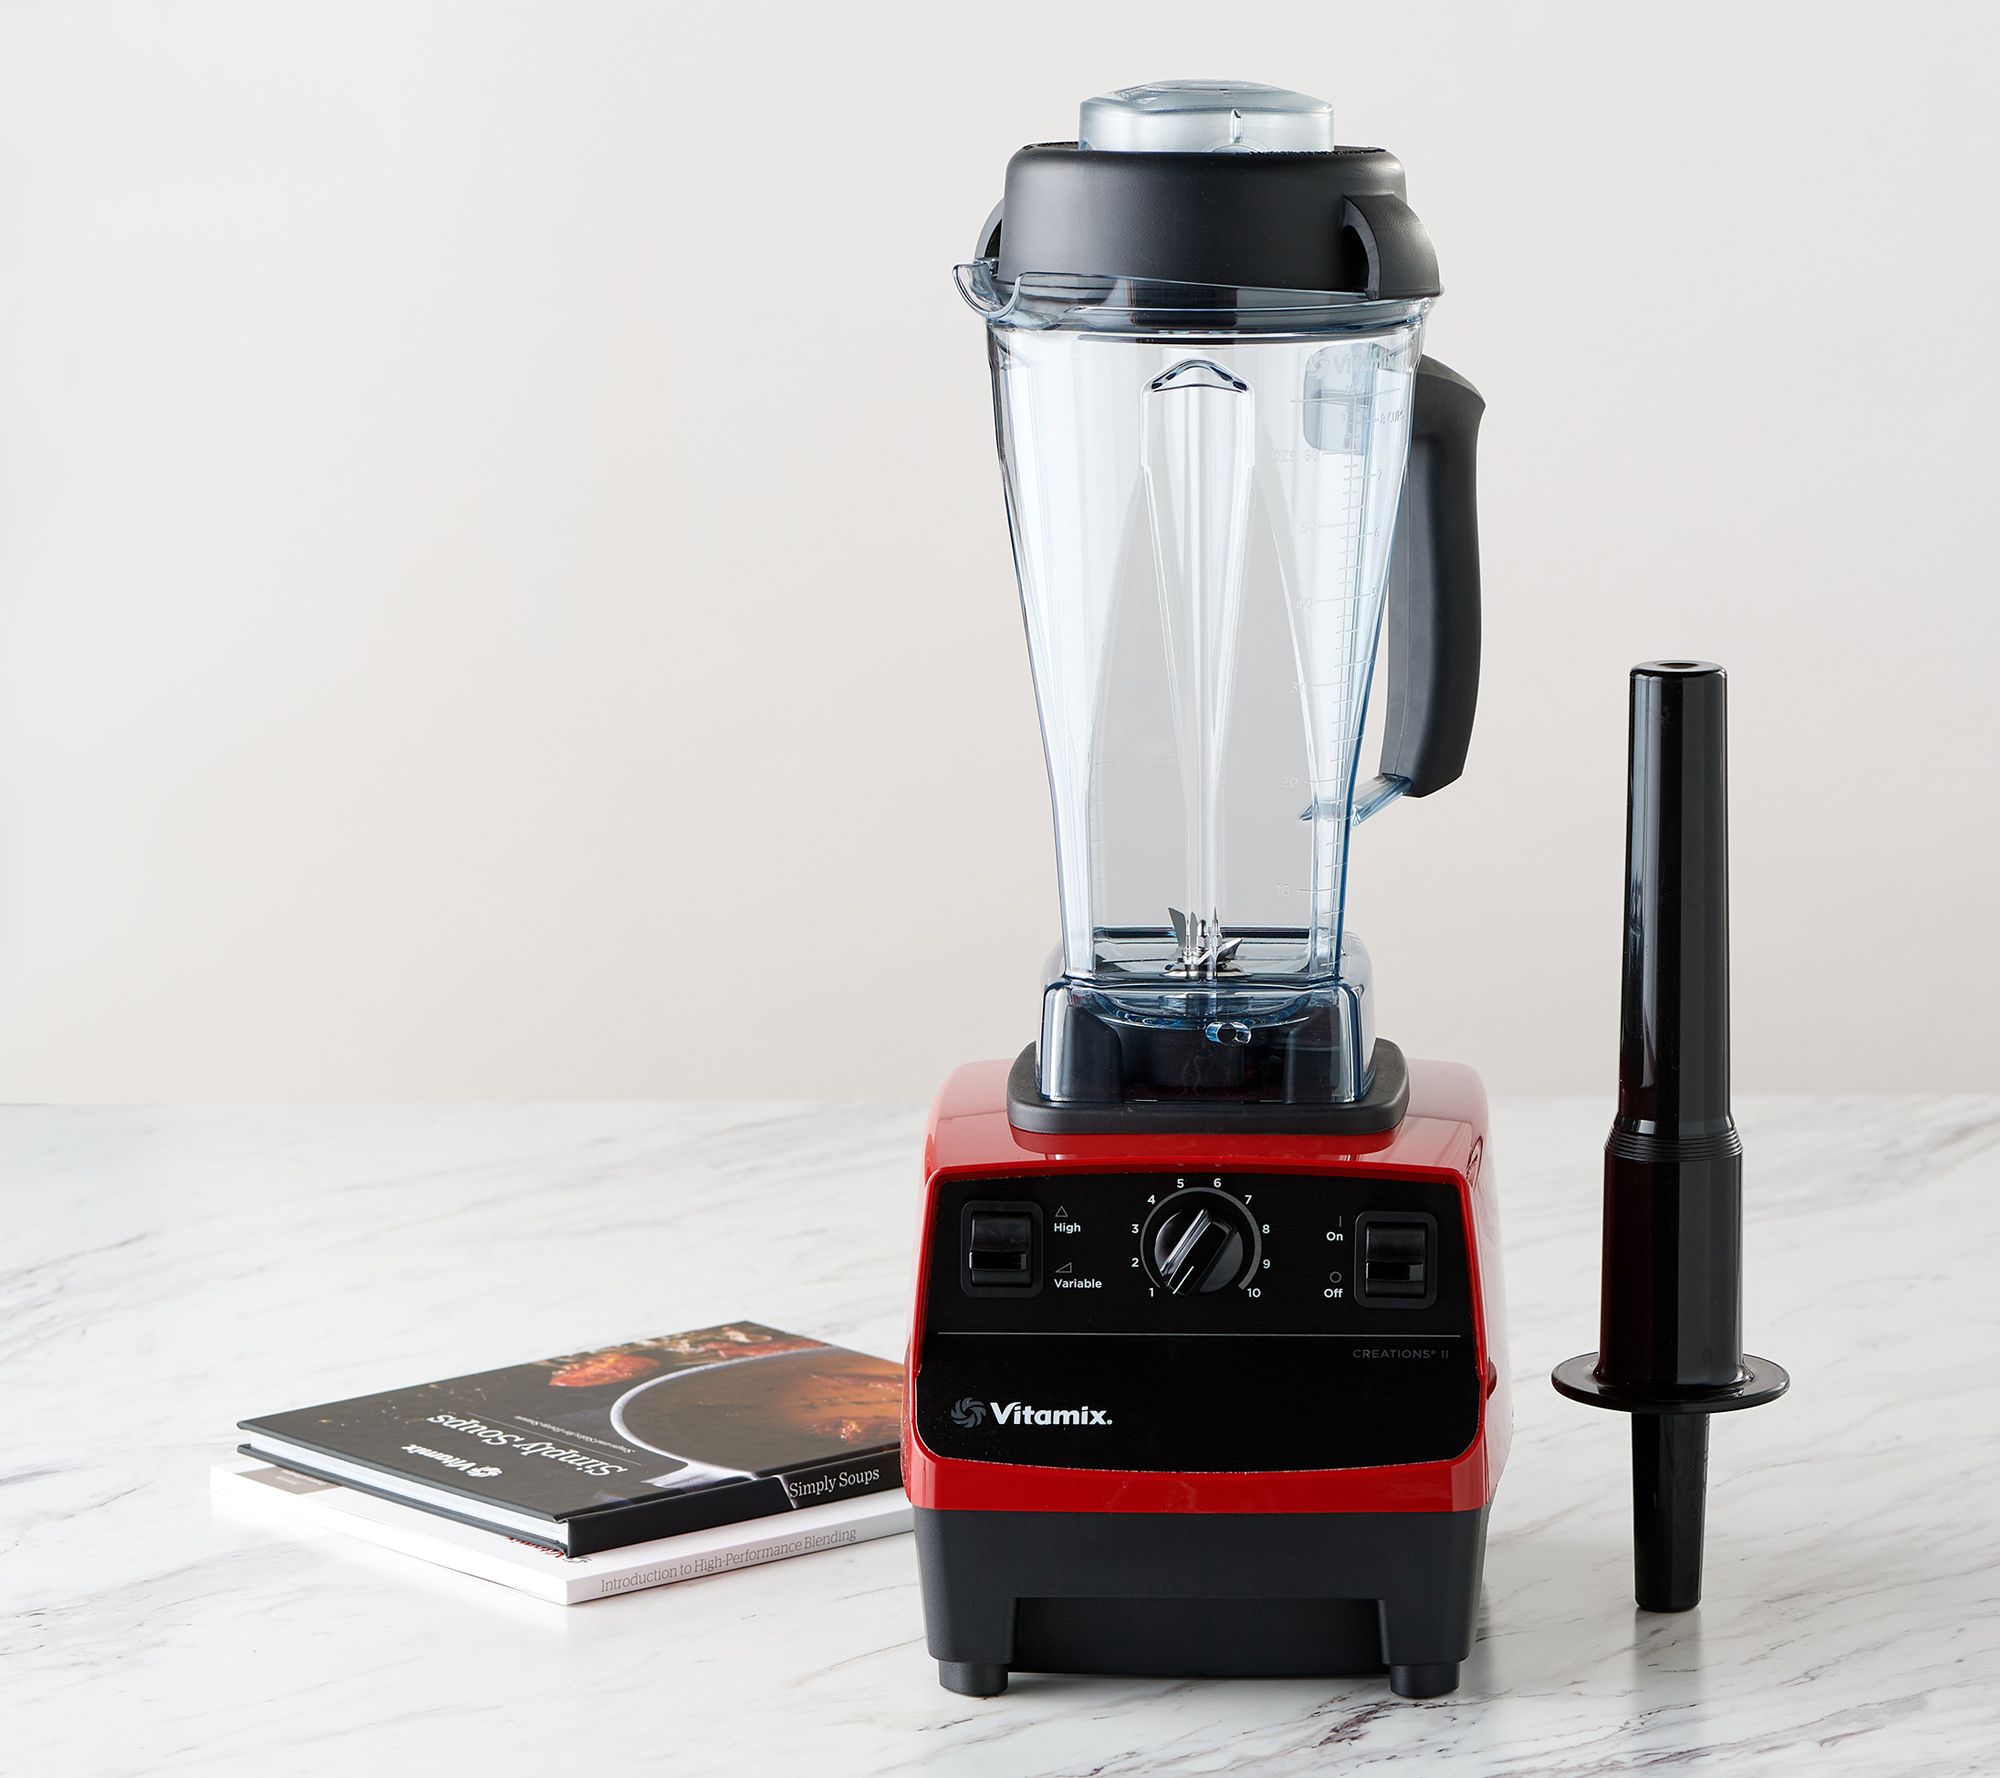 Creations II 64-oz 13-in-1 Variable Speed Blender w/Books - QVC.com